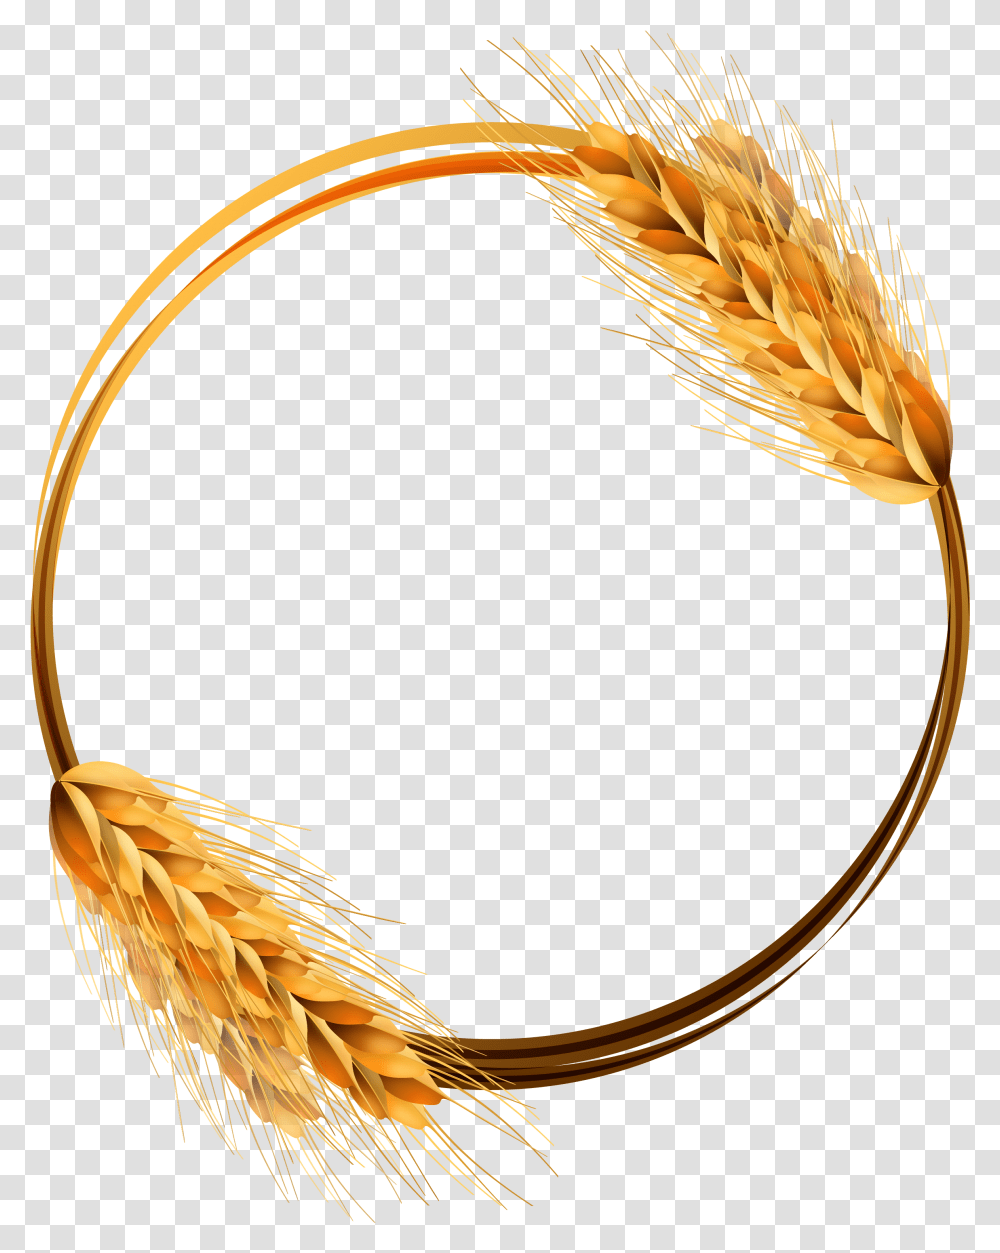 Common Wheat Ear Crop, Plant, Vegetable, Food, Produce Transparent Png